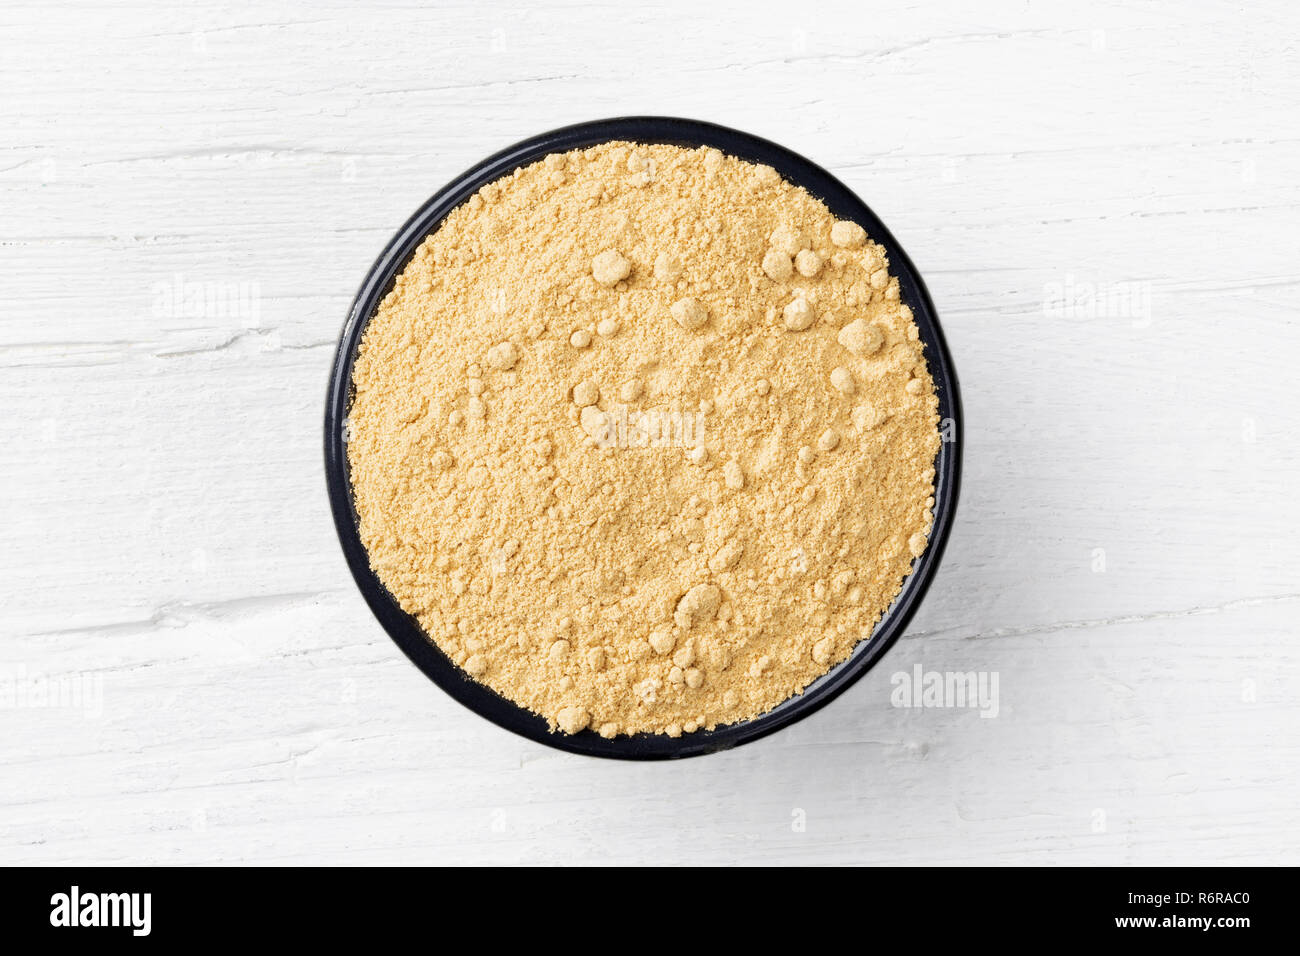 Ginger powder in round cast iron bowl on white wooden background, view directly from above Stock Photo